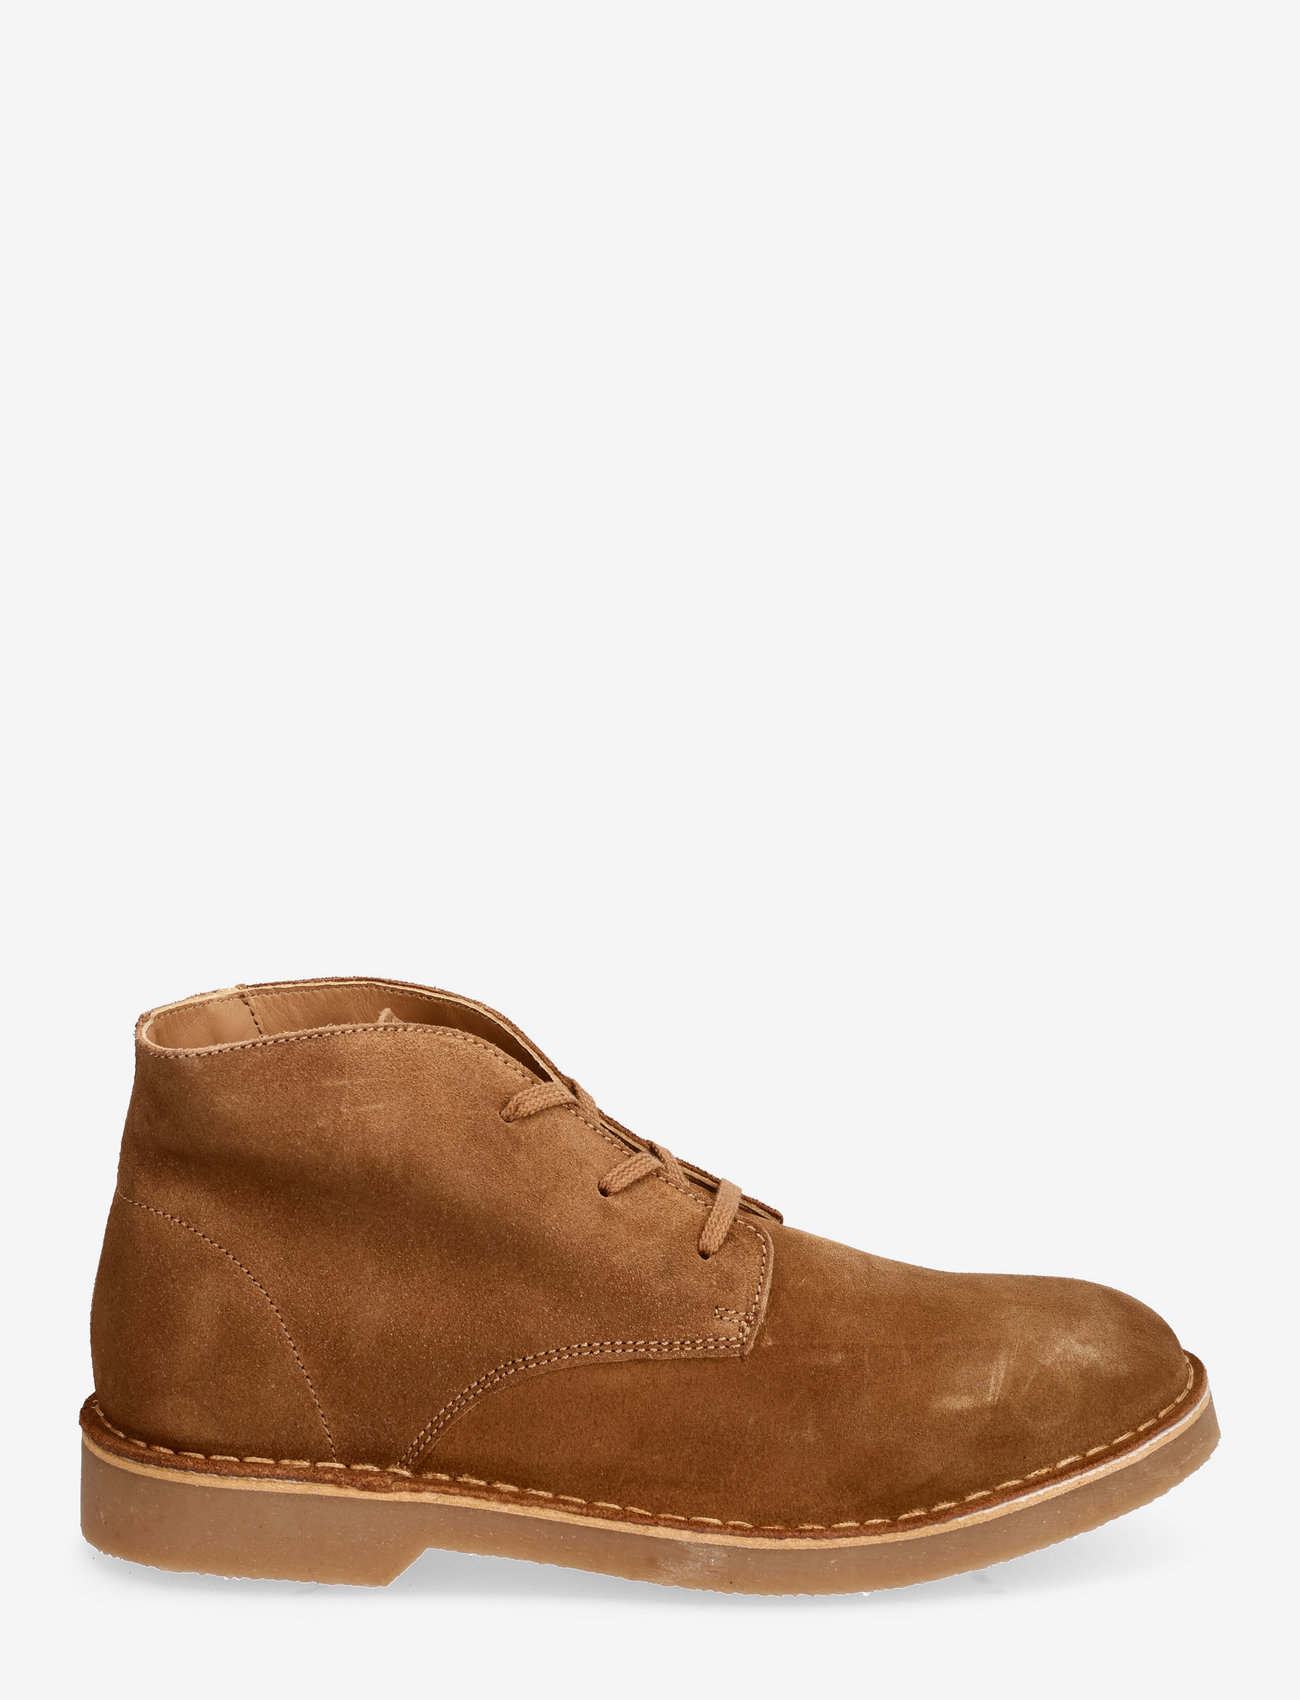 Selected Homme - SLHRIGA NEW SUEDE CHUKKA BOOT B - desert boots - tobacco brown - 1